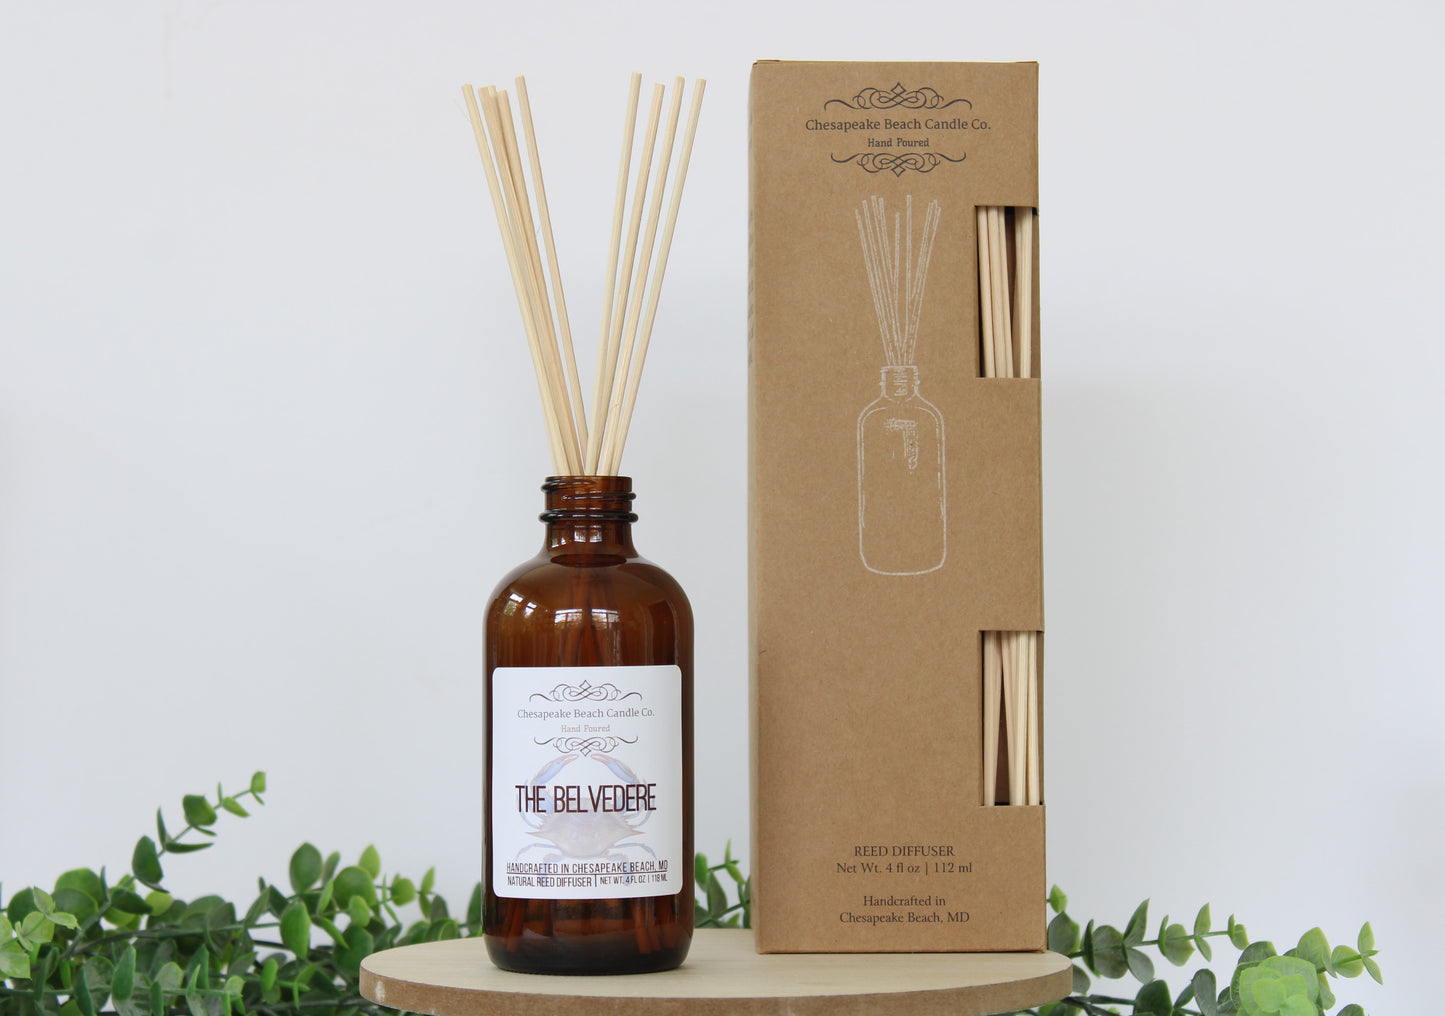 The Belvedere Reed Diffuser